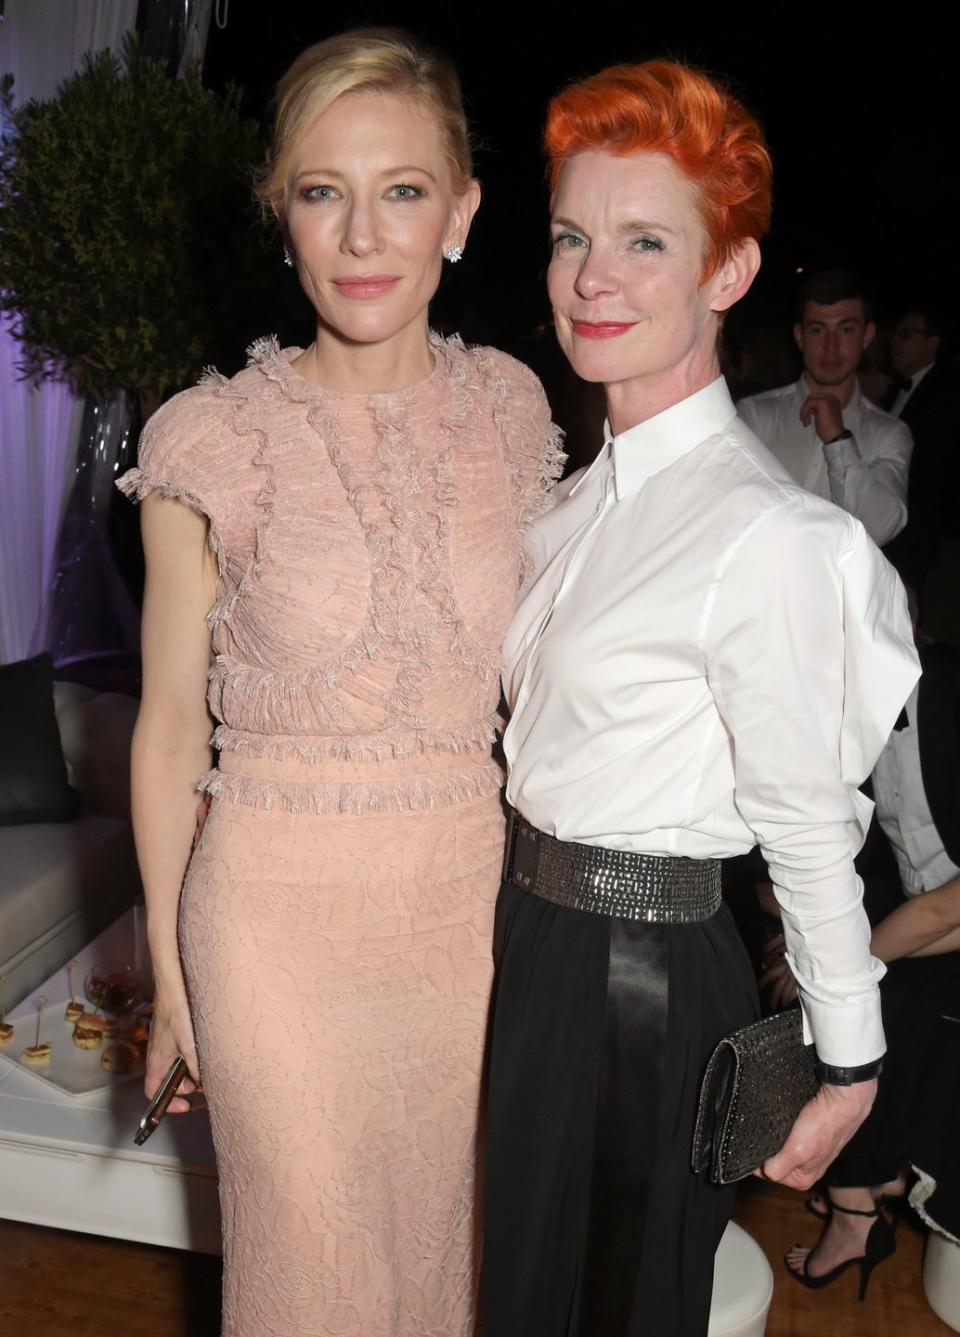 <span class="caption">Sandy Powell with Cate Blanchett</span><span class="photo-credit">David M. Benett - Getty Images</span>